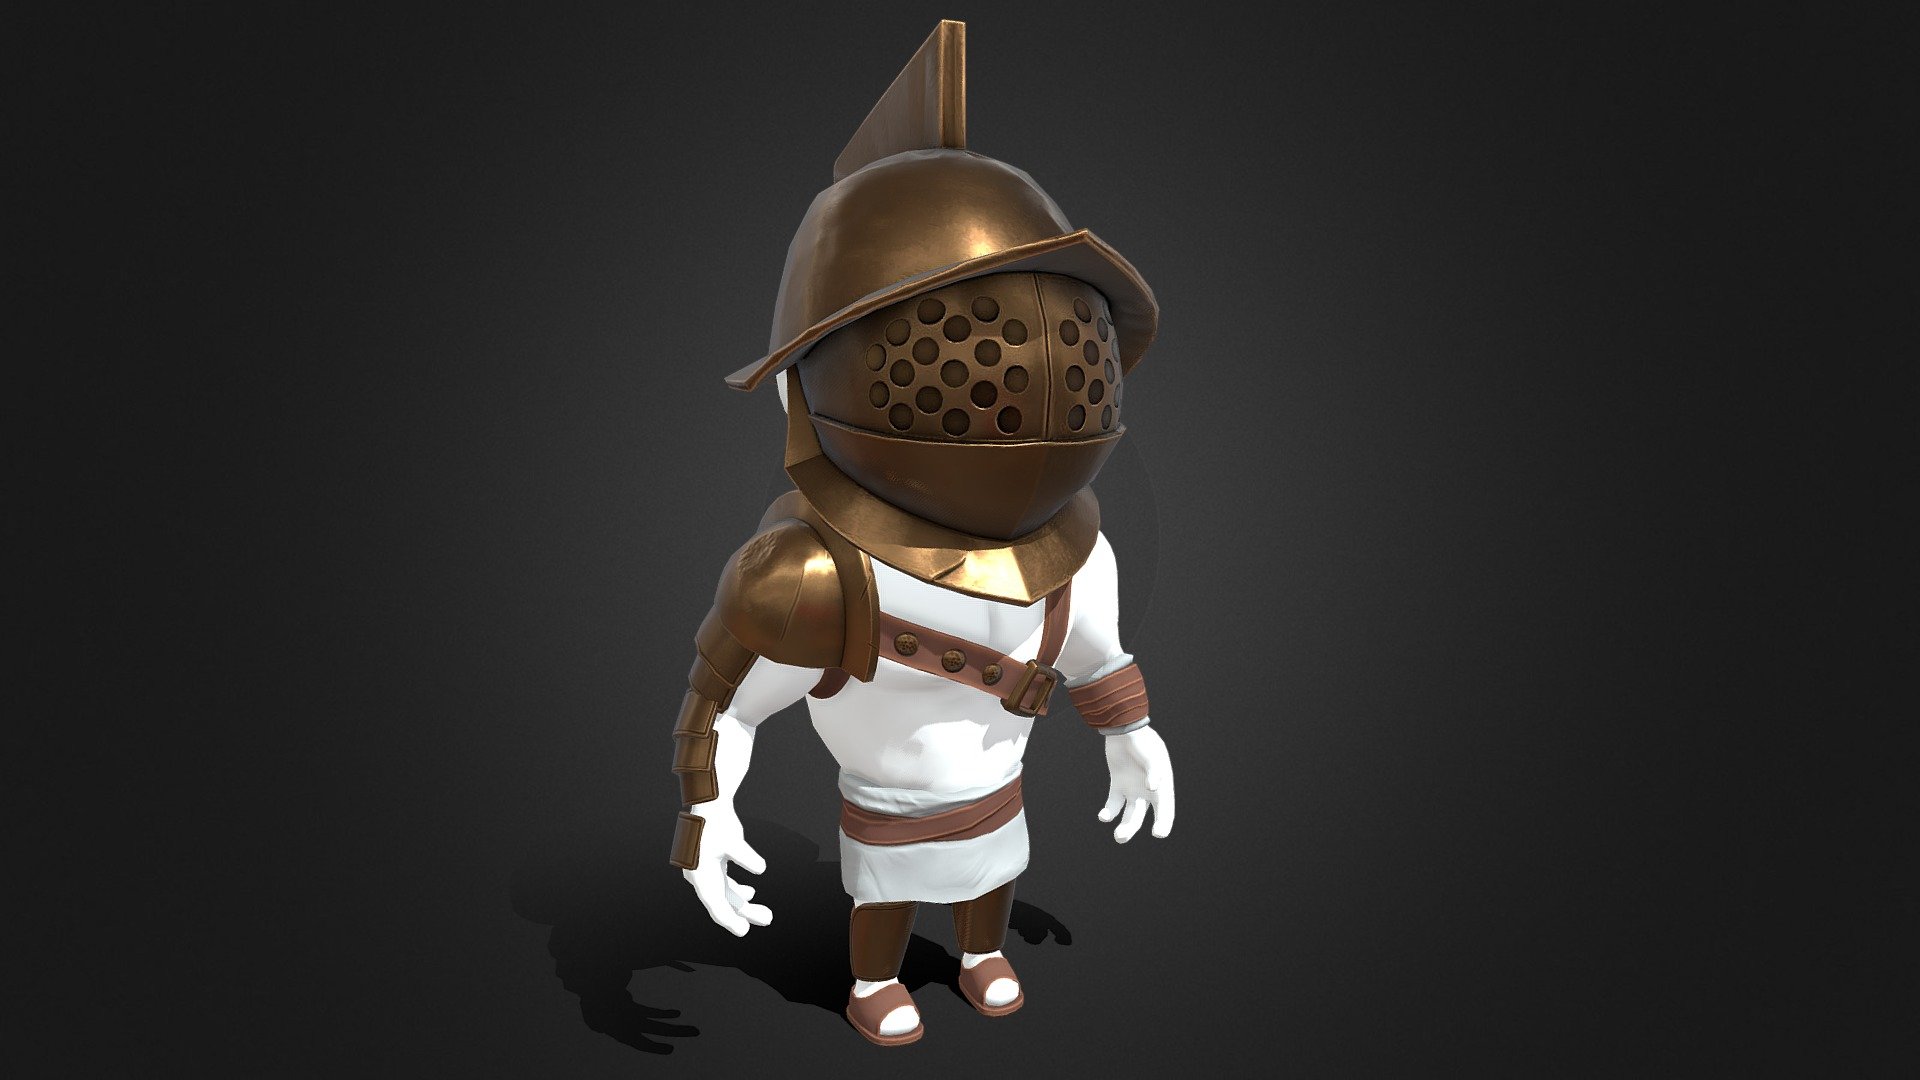 A set of Gladiator Armour created as an alternative customization option in a project im working on - Mythos party.

If you want to see the fully textured character created by Rookster you can find it here:
https://skfb.ly/6KRxE - Gladiator Armour Full Set - 3D model by Fraser Gray (@FraserG) 3d model